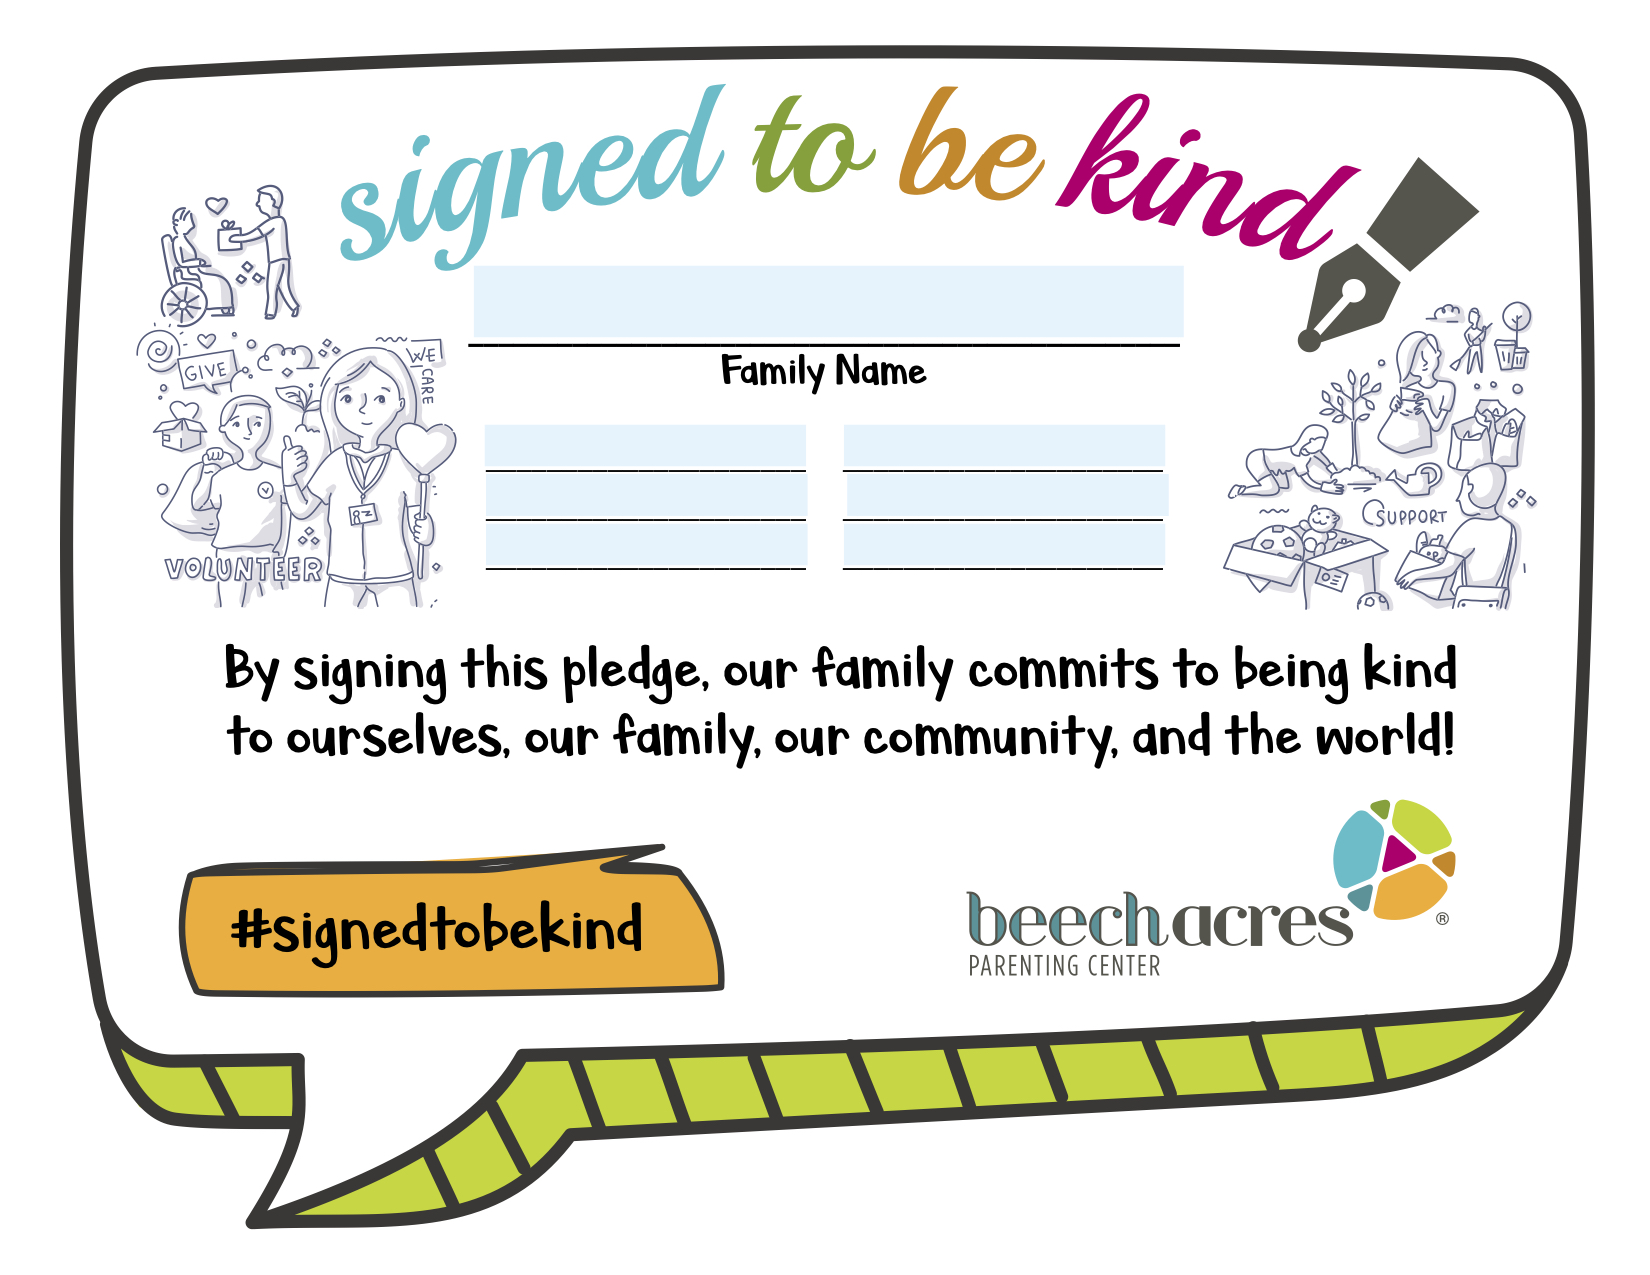 Download Your Signed To Be Kind Certificate!